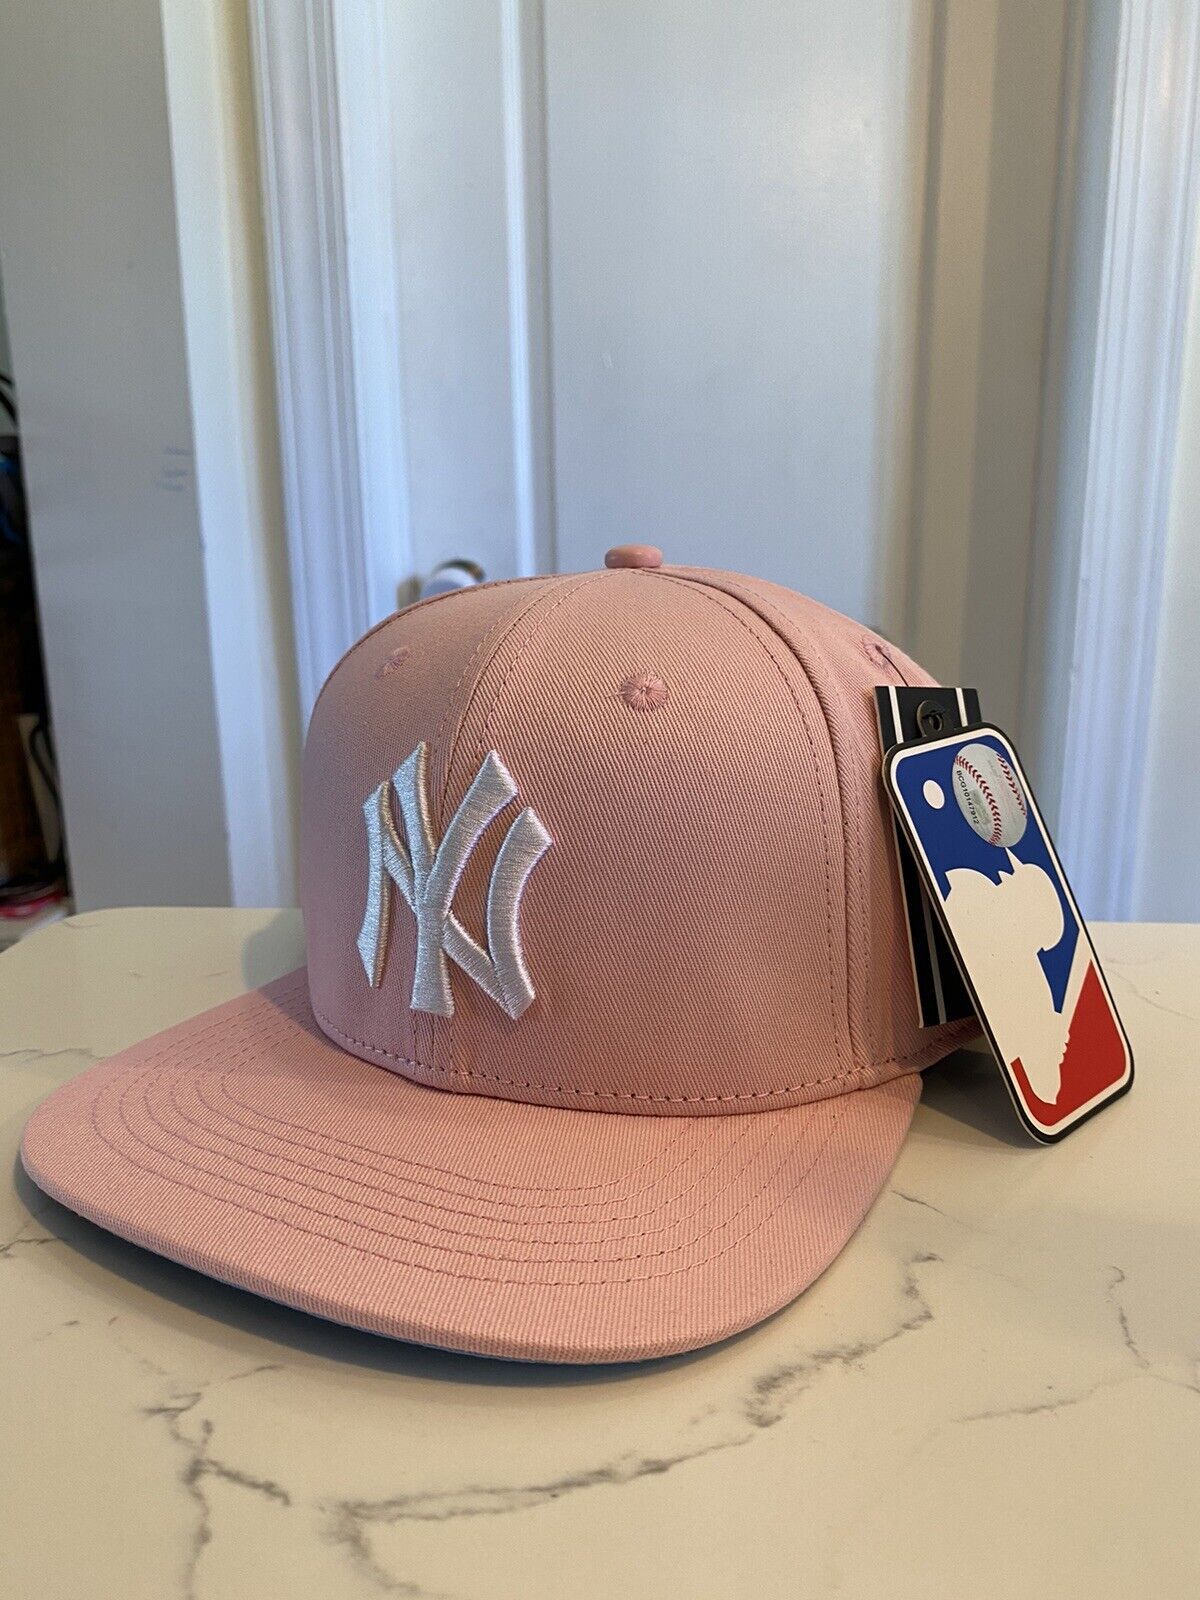 Primary image for Yankees Pink snapback Pro Standard Cap 2000 World Series Patch